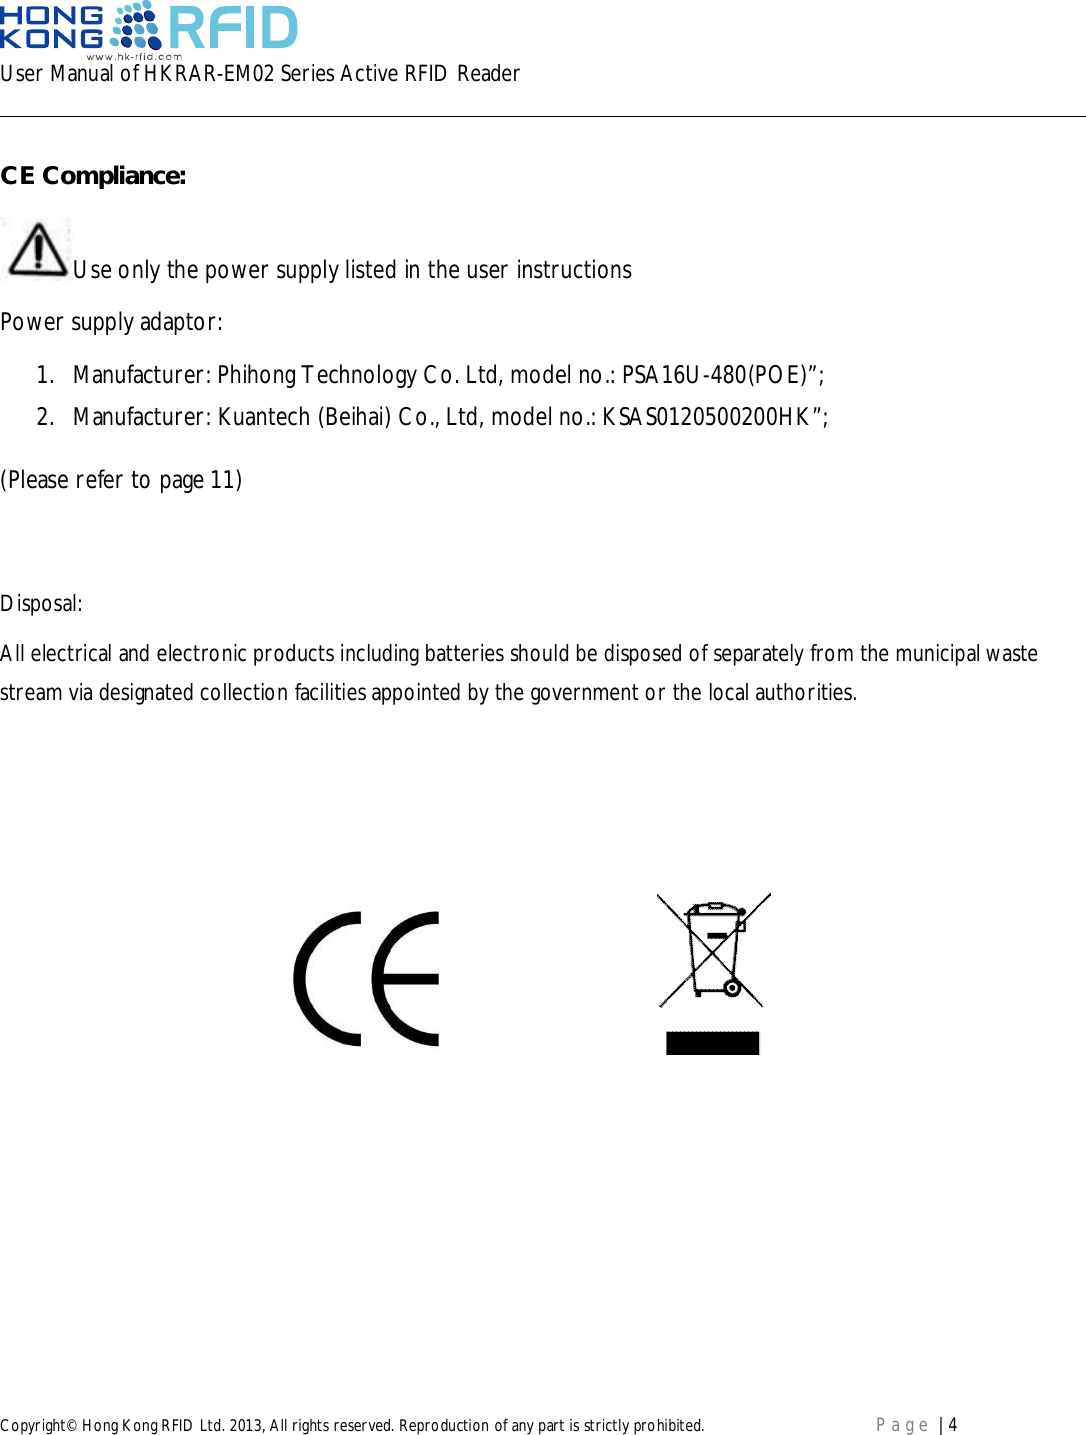 User Manual of HKRAR-EM02 Series Active RFID ReaderCopyright© Hong Kong RFID Ltd. 2013, All rights reserved. Reproduction of any part is strictly prohibited. Page | 4CE Compliance:Use only the power supply listed in the user instructionsPower supply adaptor:1. Manufacturer: Phihong Technology Co. Ltd, model no.: PSA16U-480(POE)”;2. Manufacturer: Kuantech (Beihai) Co., Ltd, model no.: KSAS0120500200HK”;(Please refer to page 11)Disposal:All electrical and electronic products including batteries should be disposed of separately from the municipal wastestream via designated collection facilities appointed by the government or the local authorities.